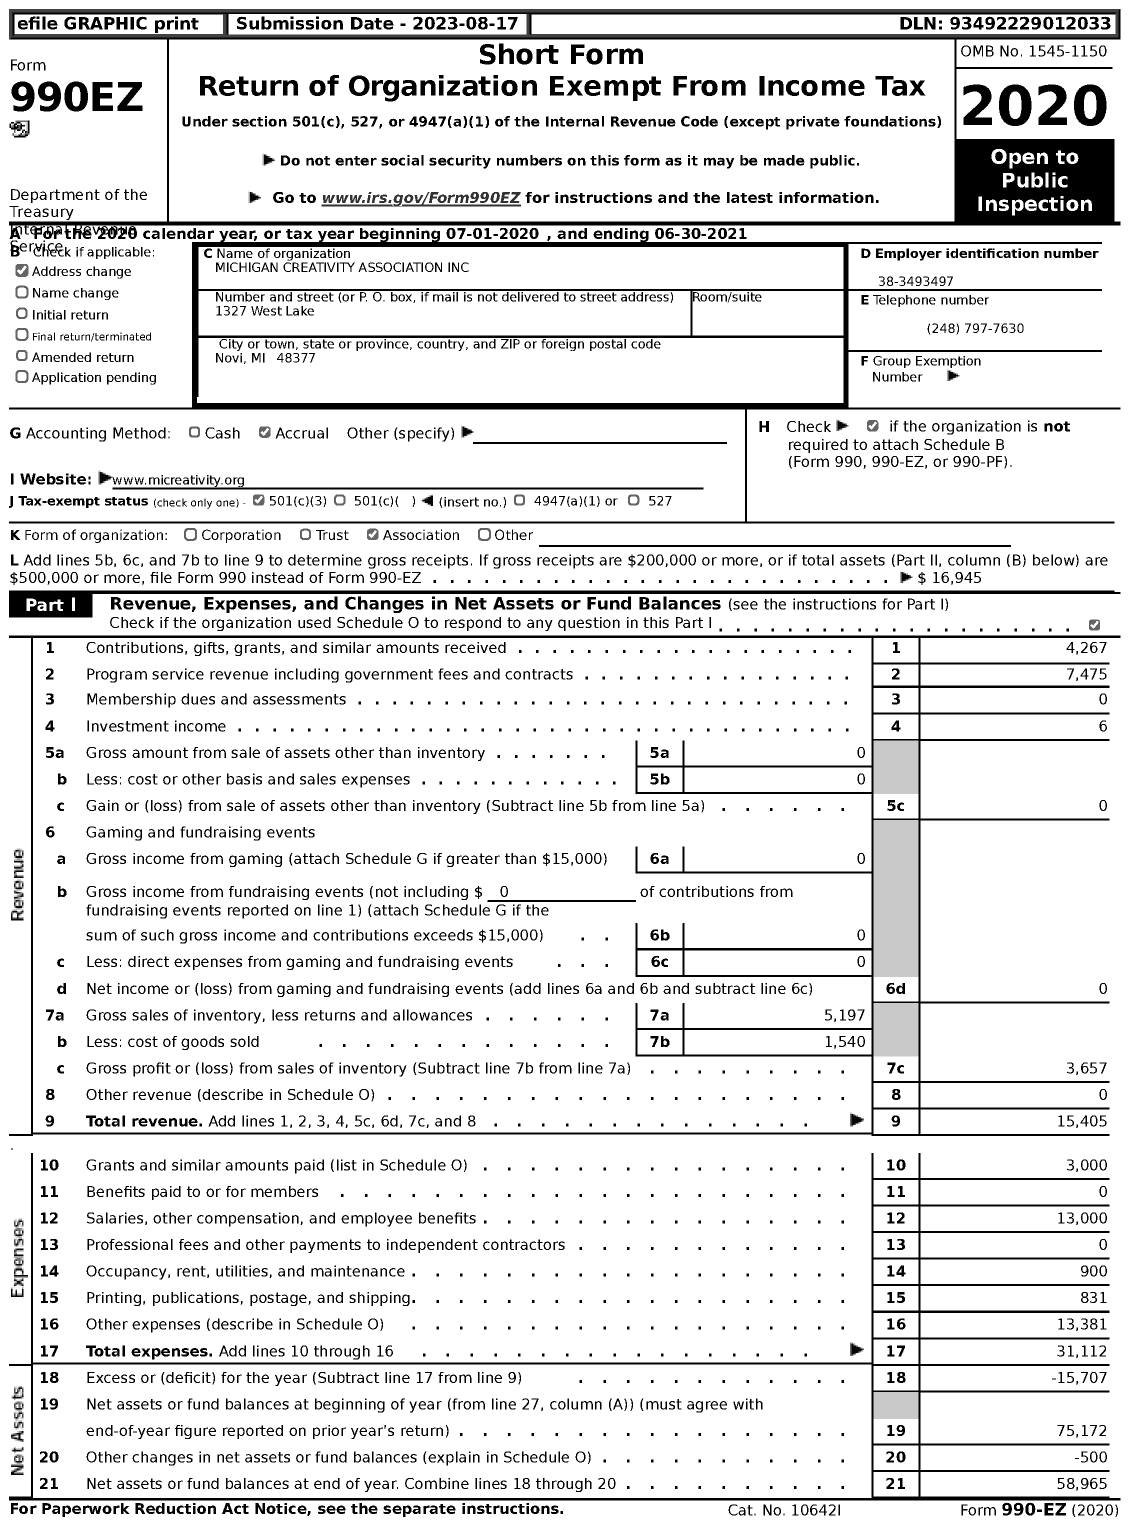 Image of first page of 2020 Form 990EZ for Michigan Creativity Association